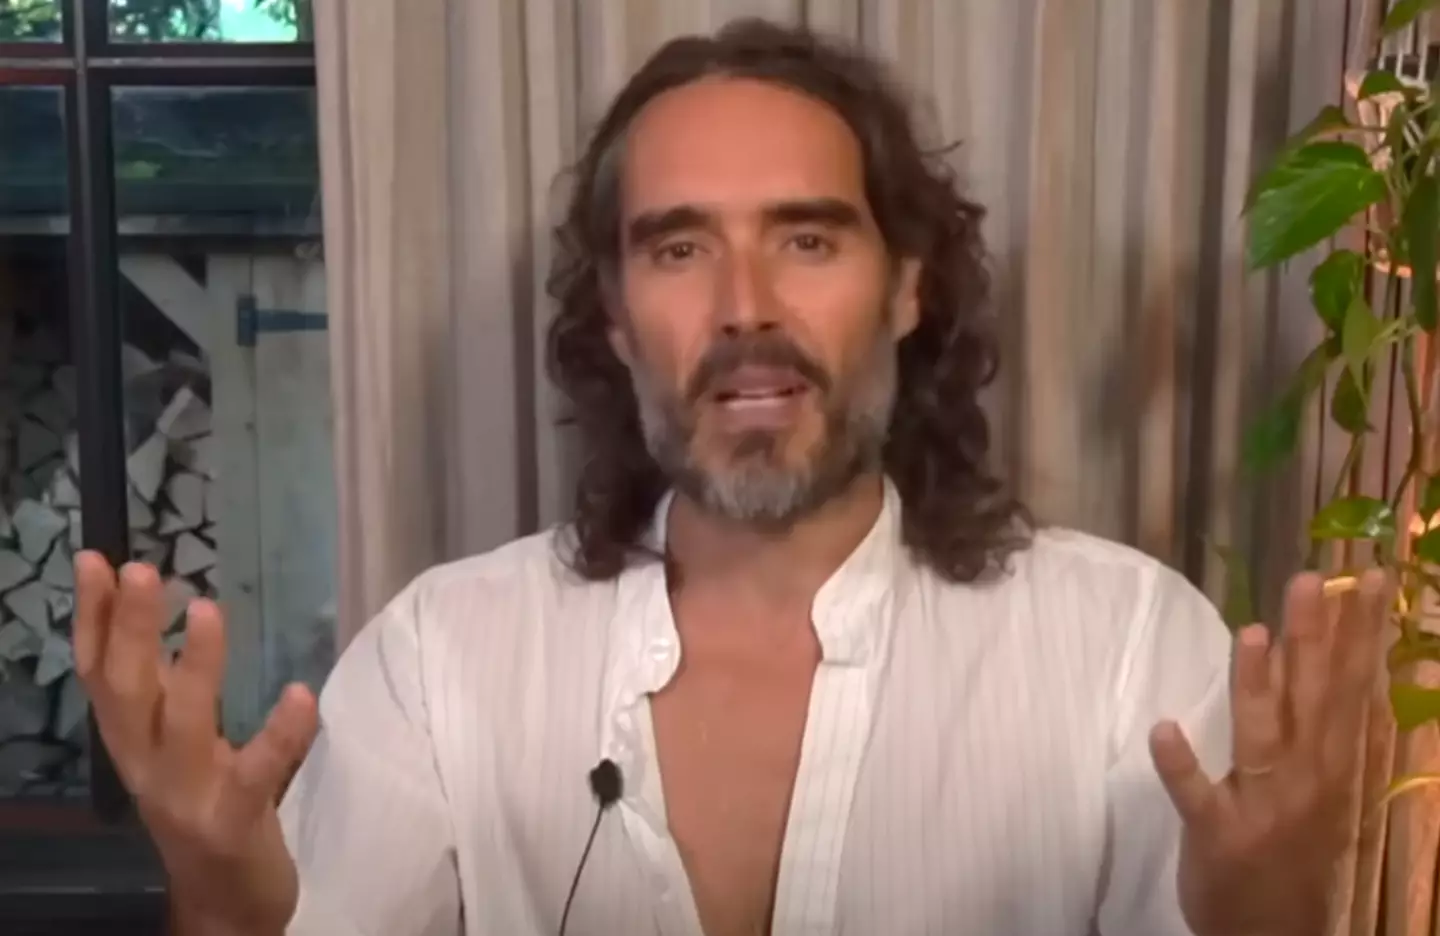 Russell Brand has appealed to fans to subscribe to his Rumble channel.